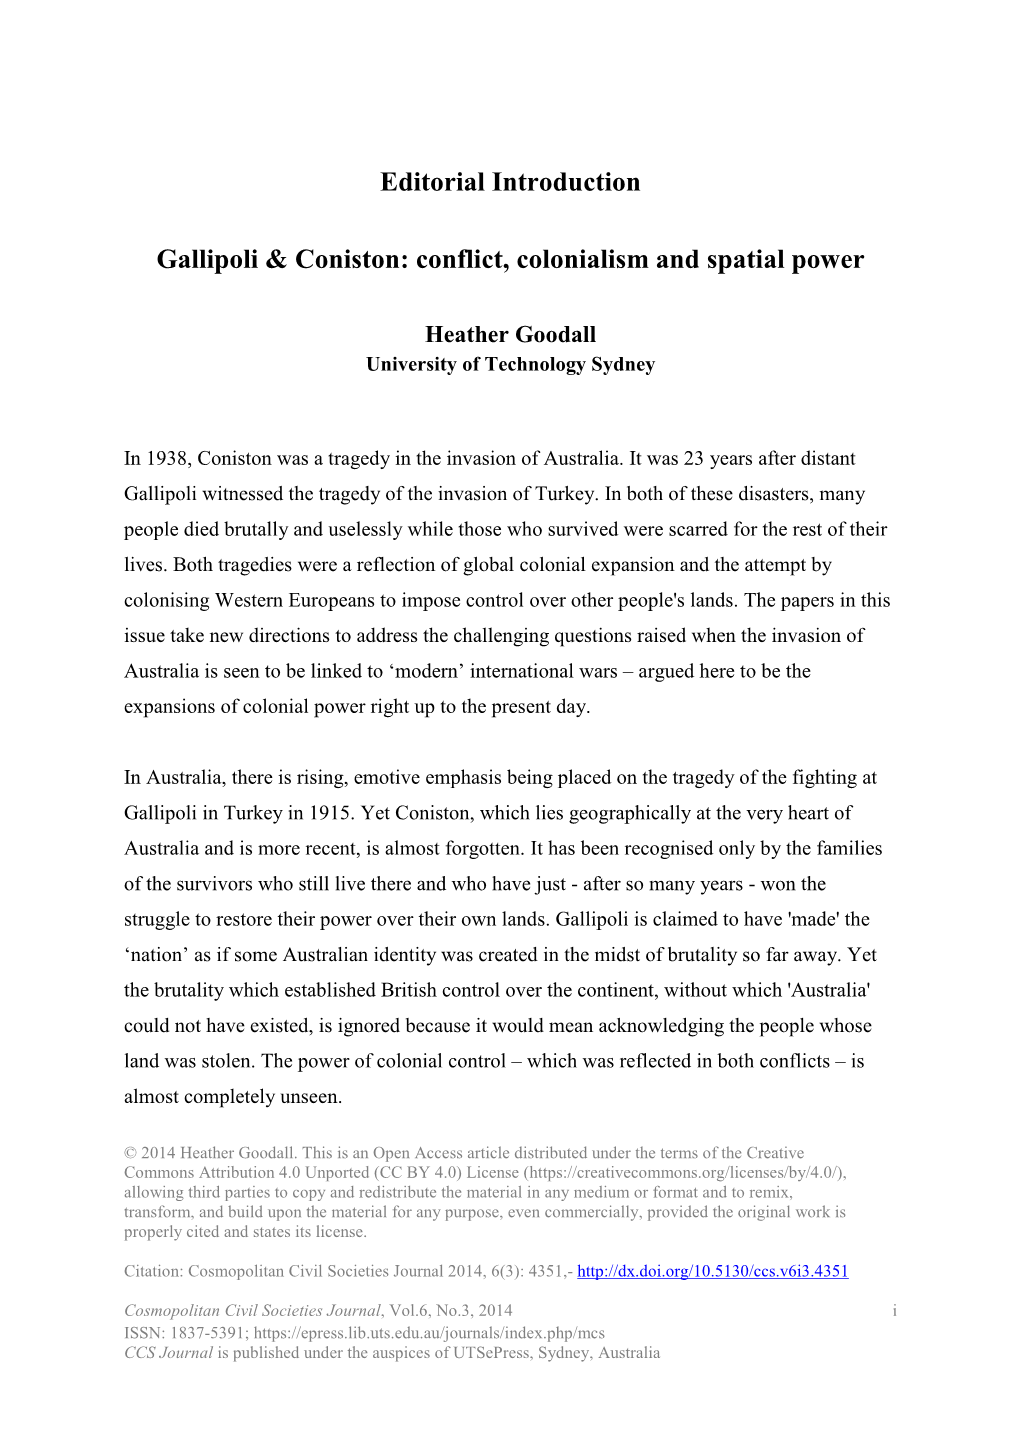 Editorial Introduction Gallipoli & Coniston: Conflict, Colonialism And